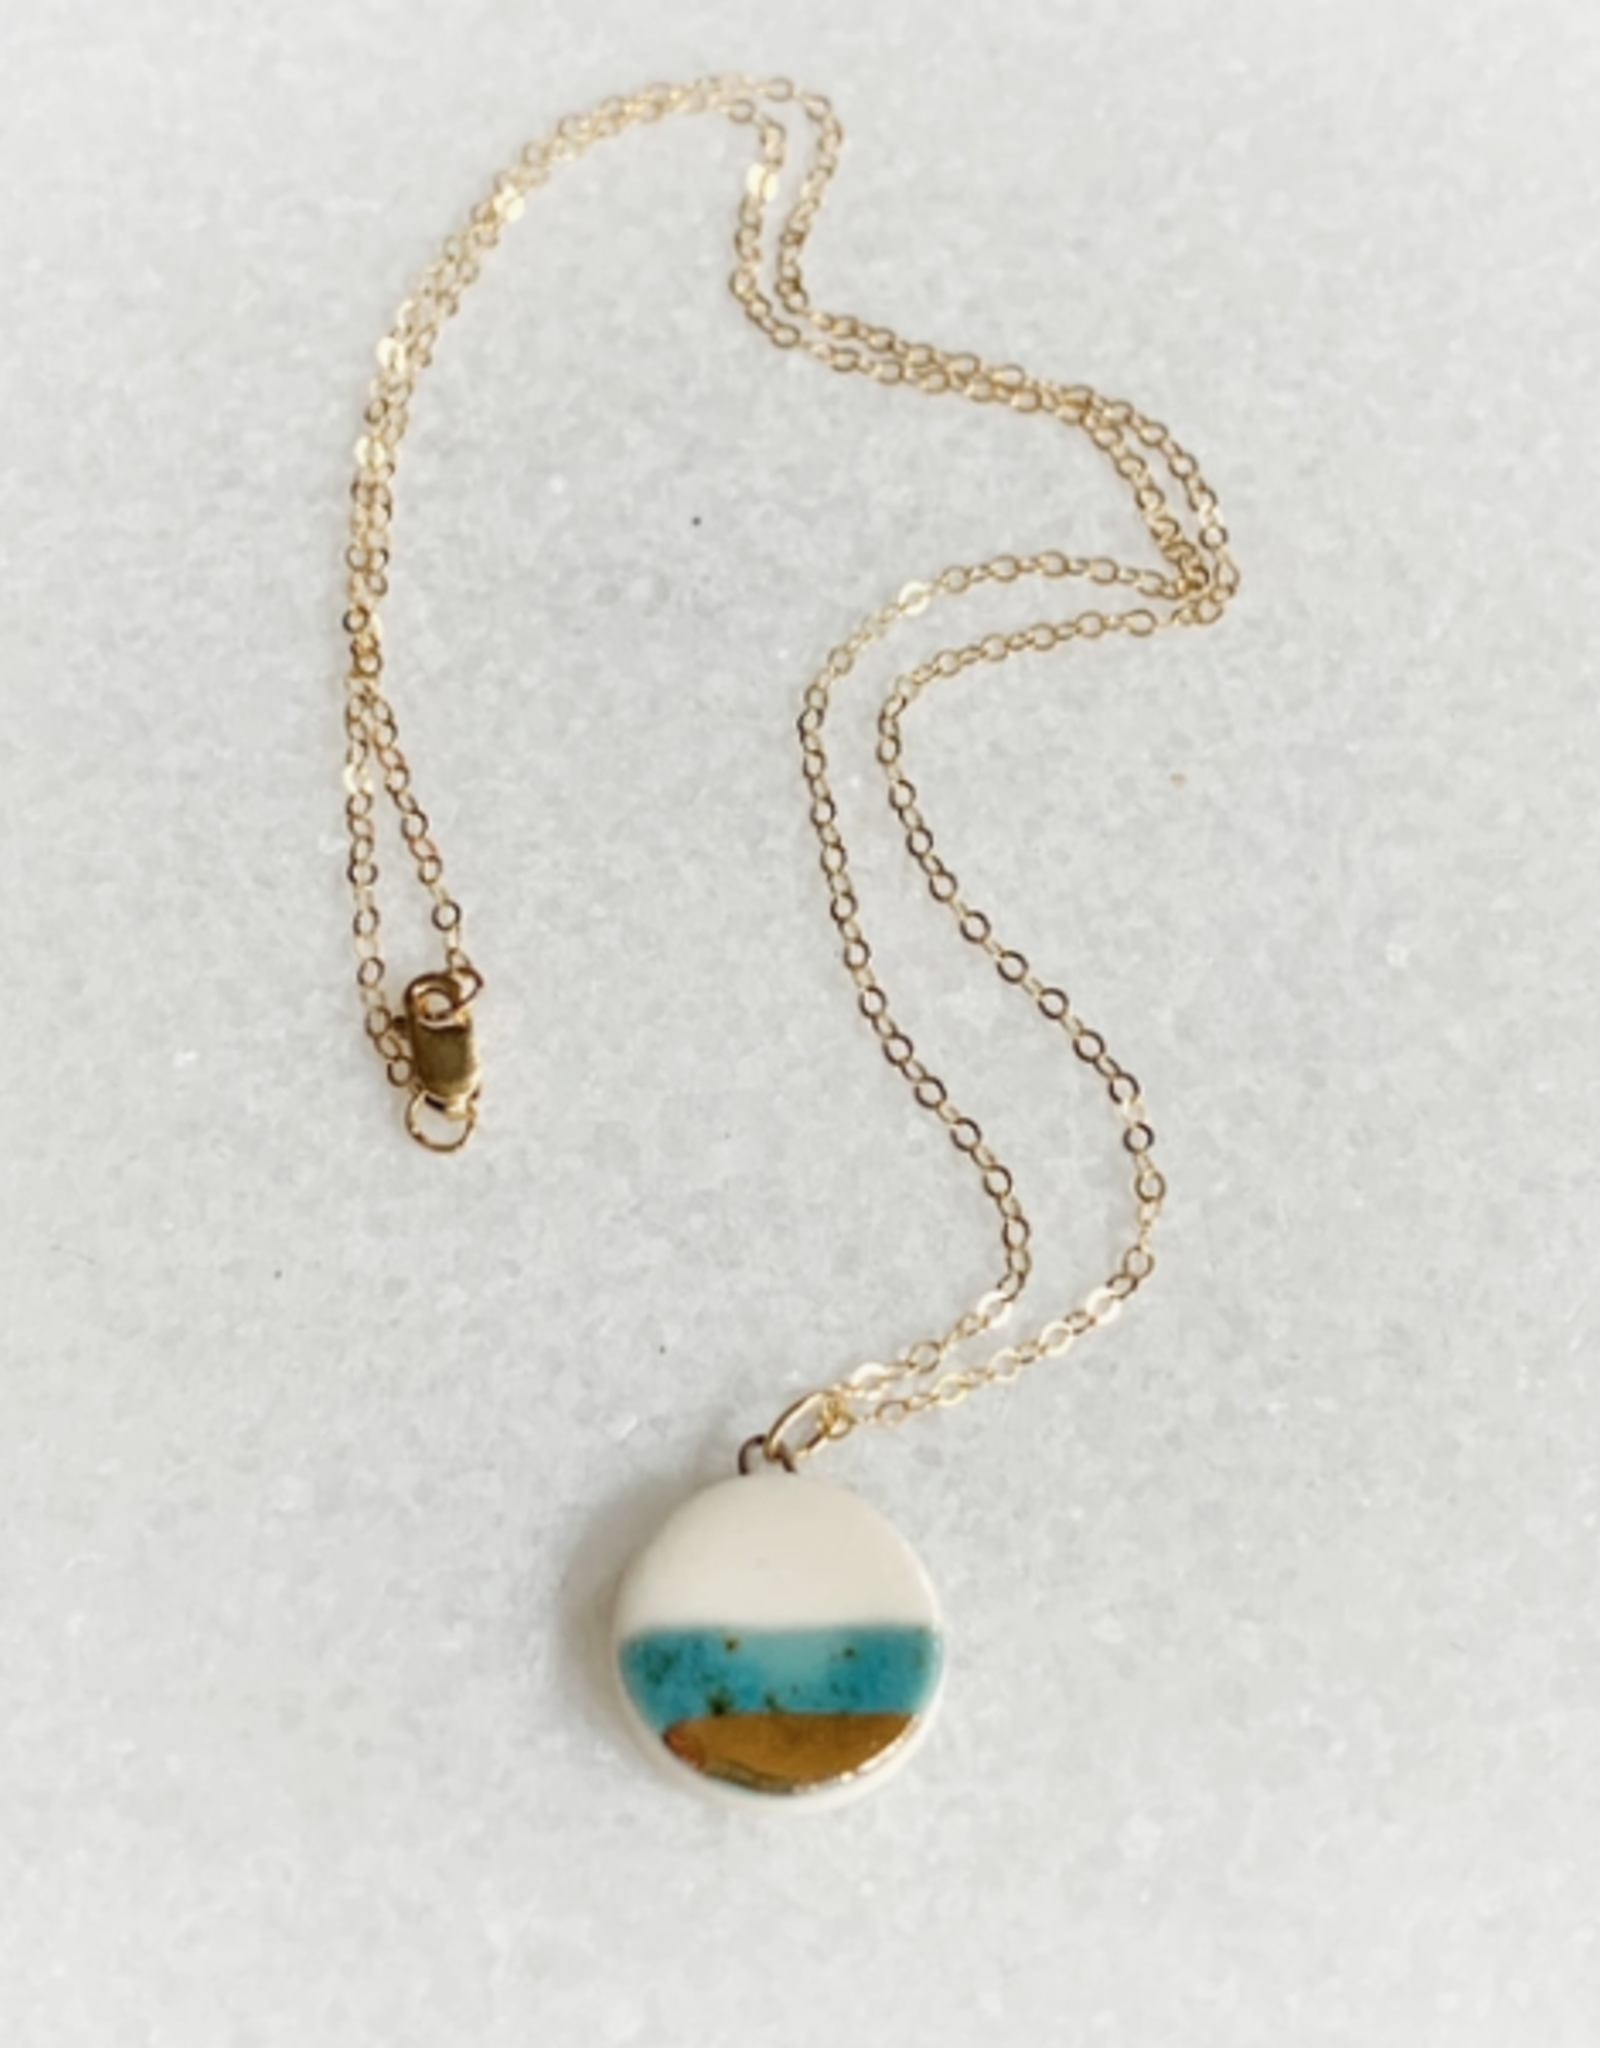 Small Circle Necklace - Teal/White/Gold